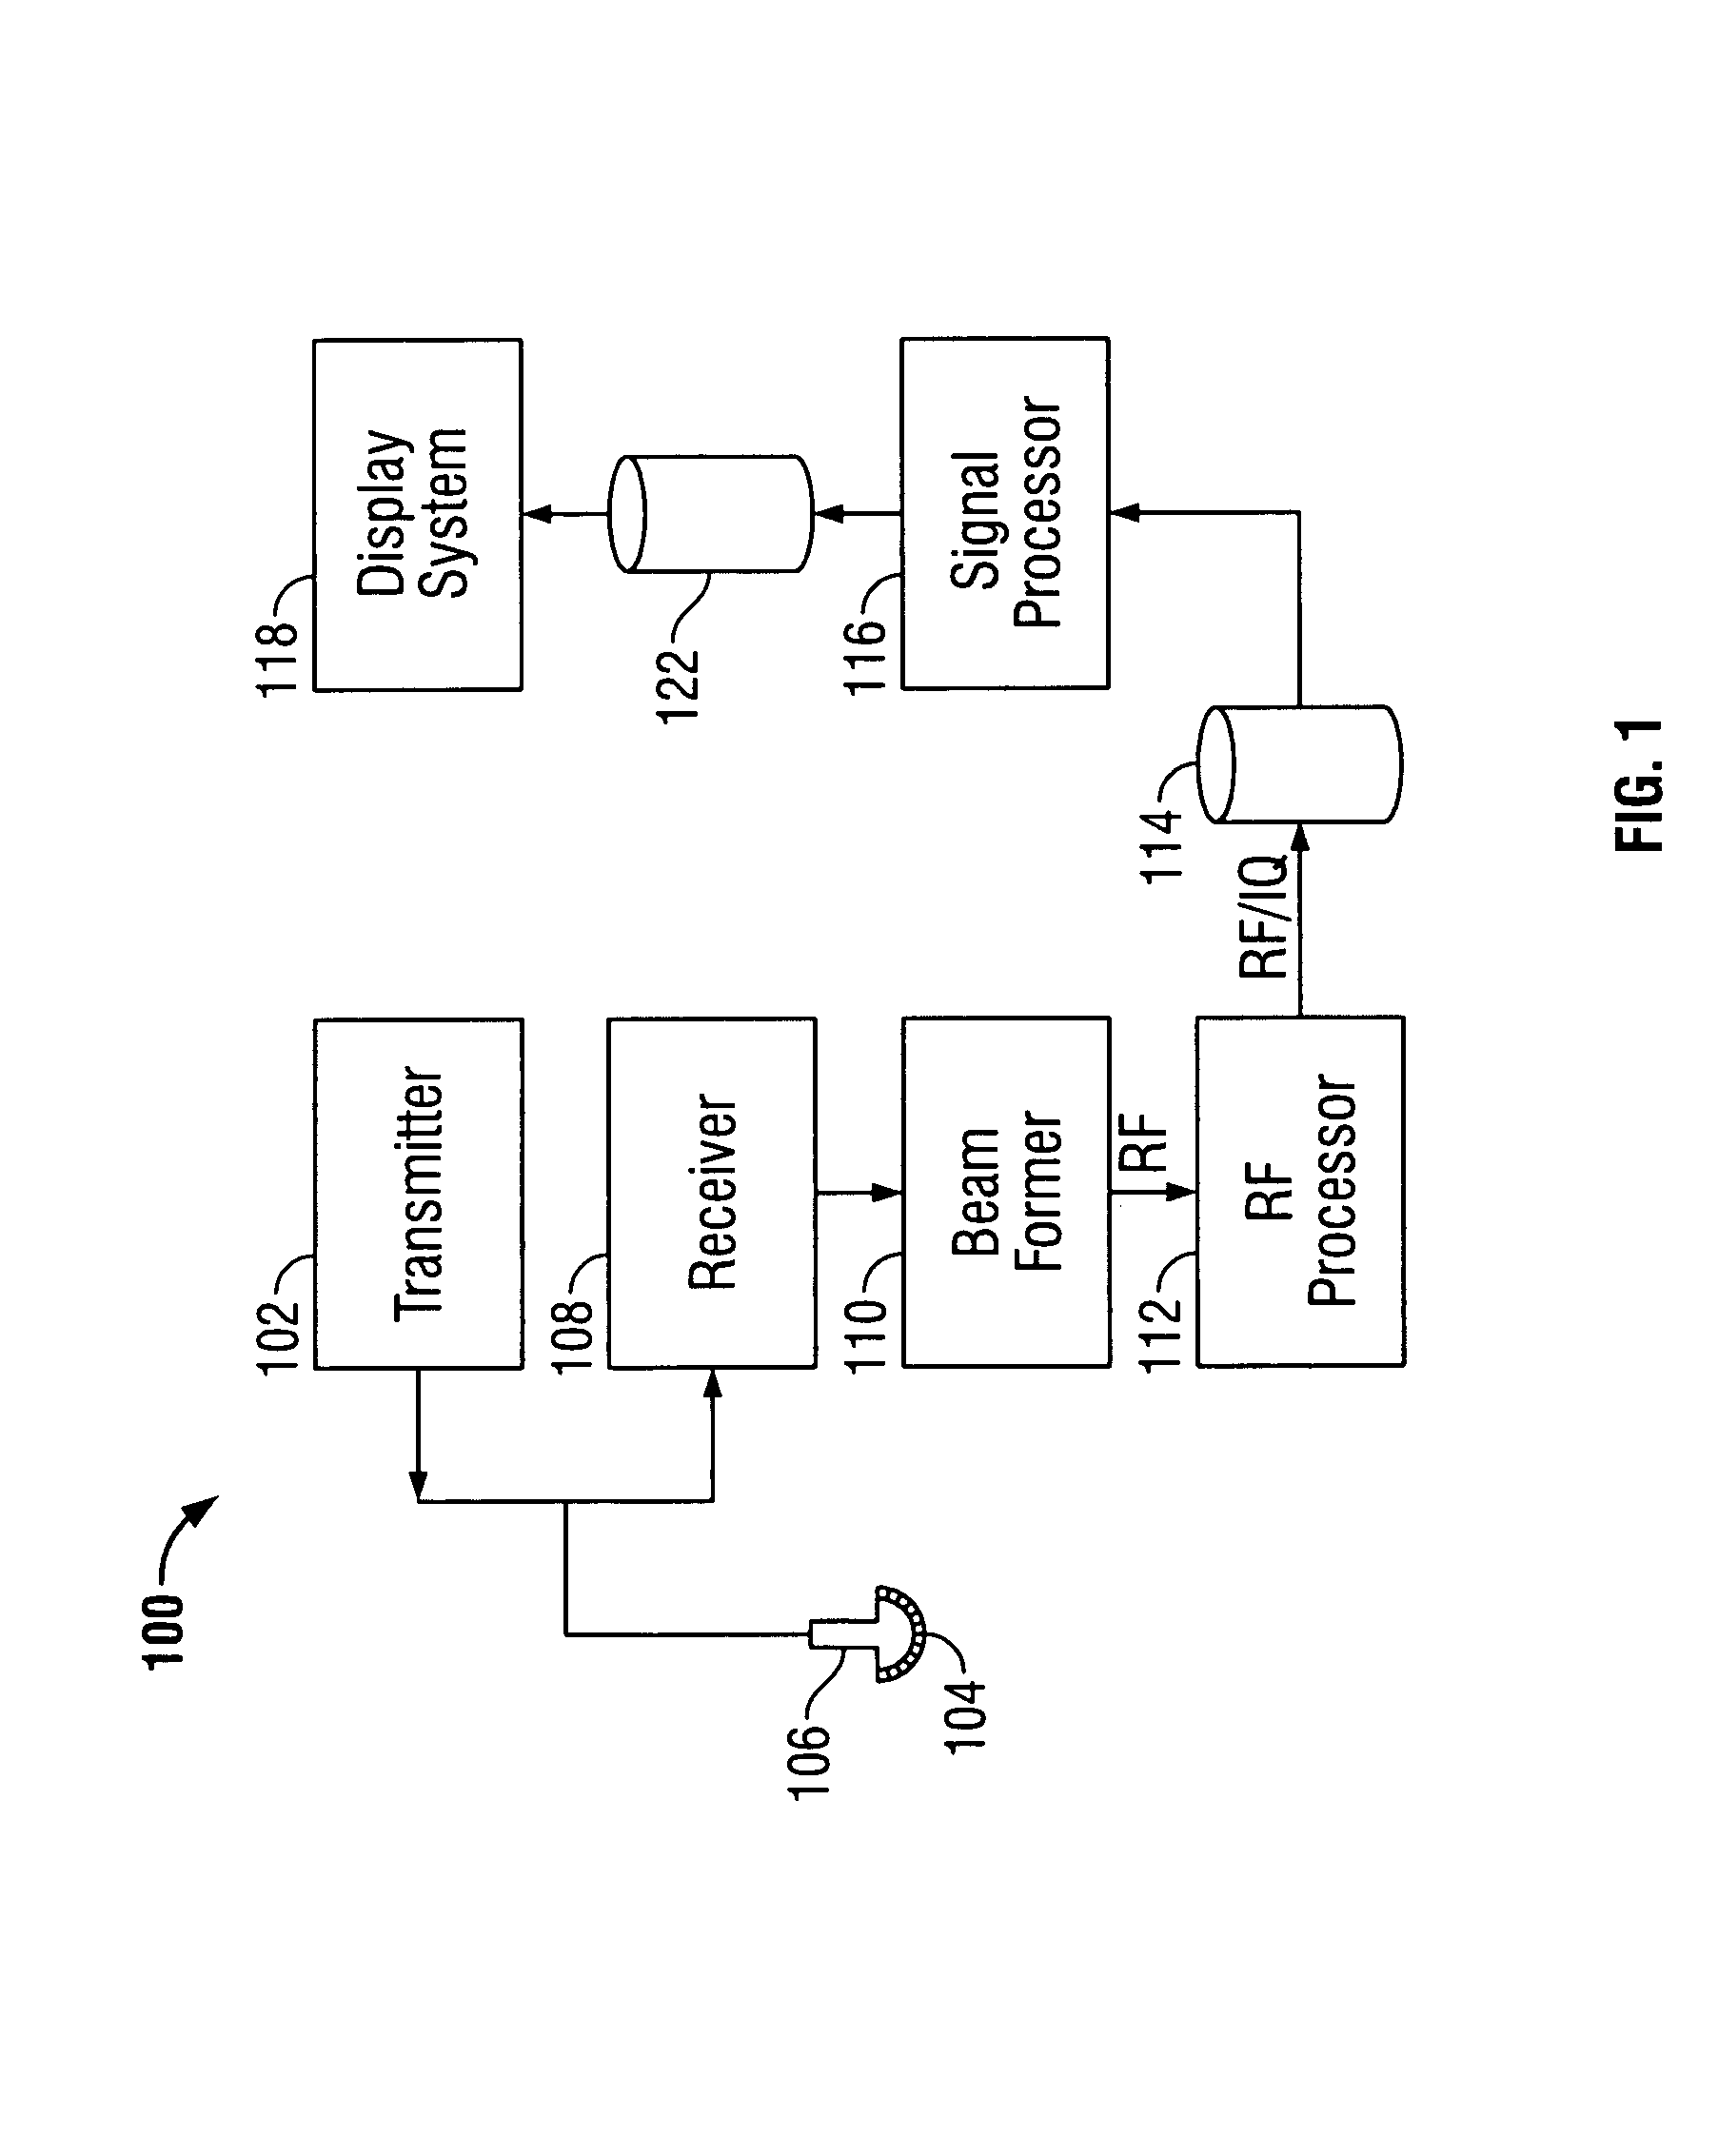 Method and apparatus for detecting anatomic structures